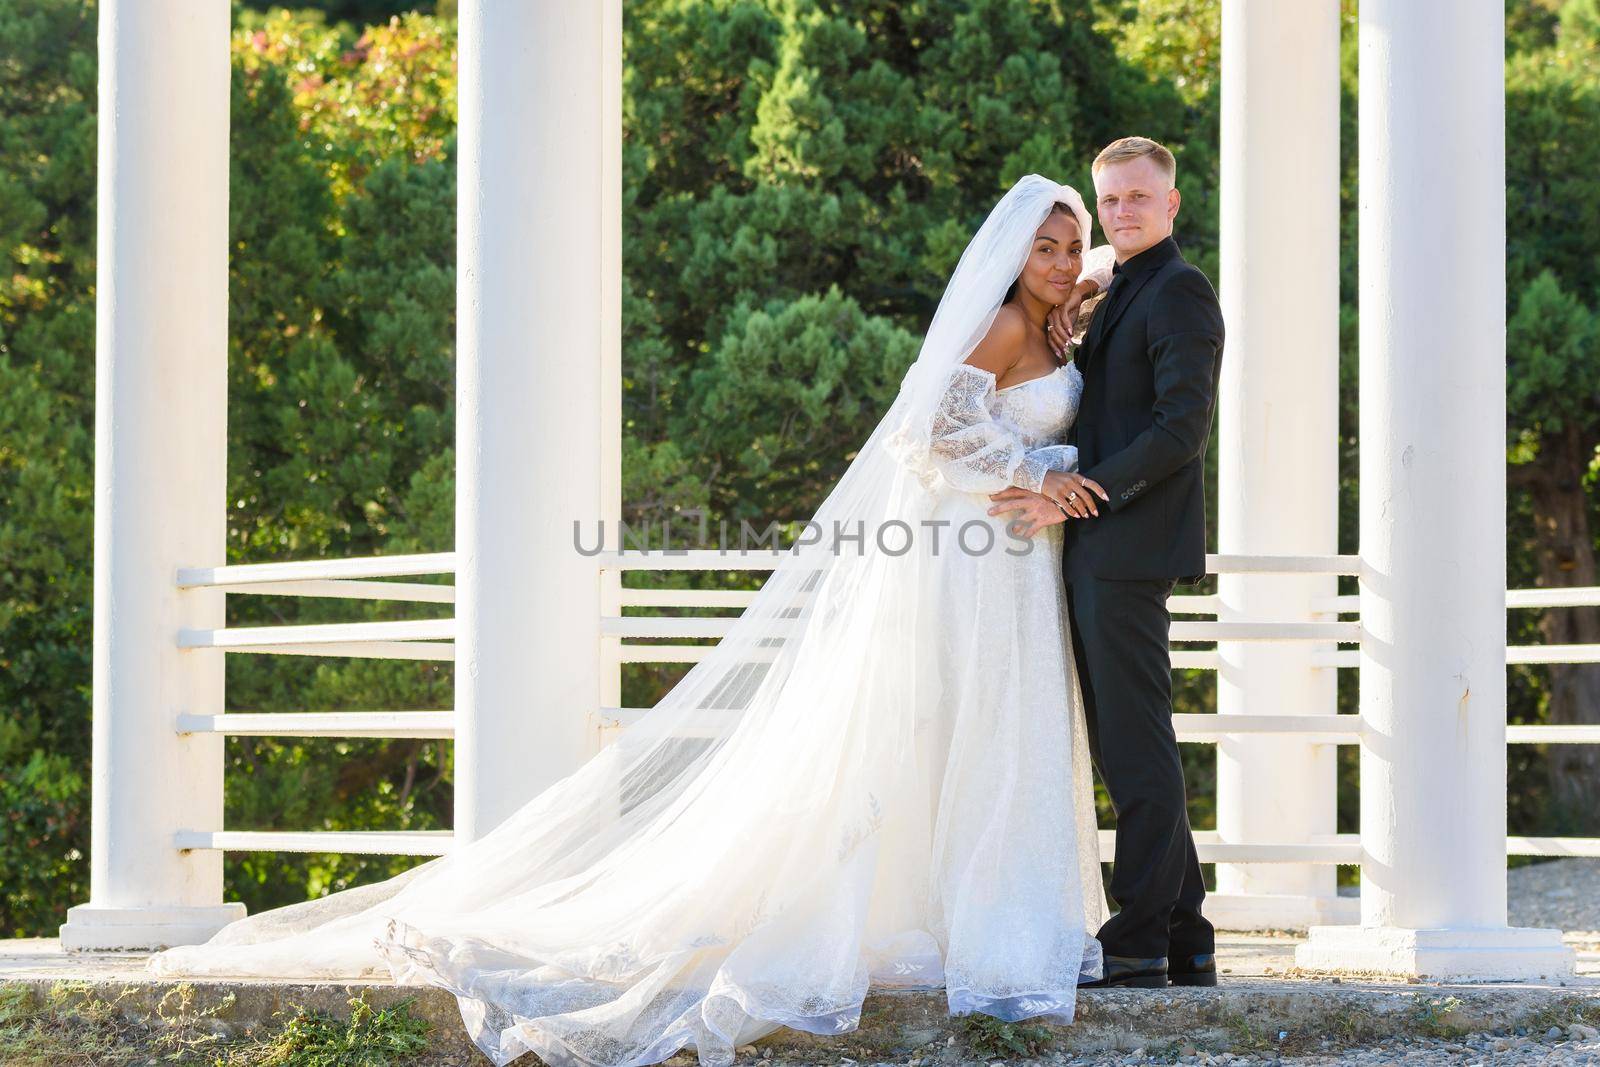 Portrait of a mixed race newlyweds in front of a gazebo with round columns by Madhourse